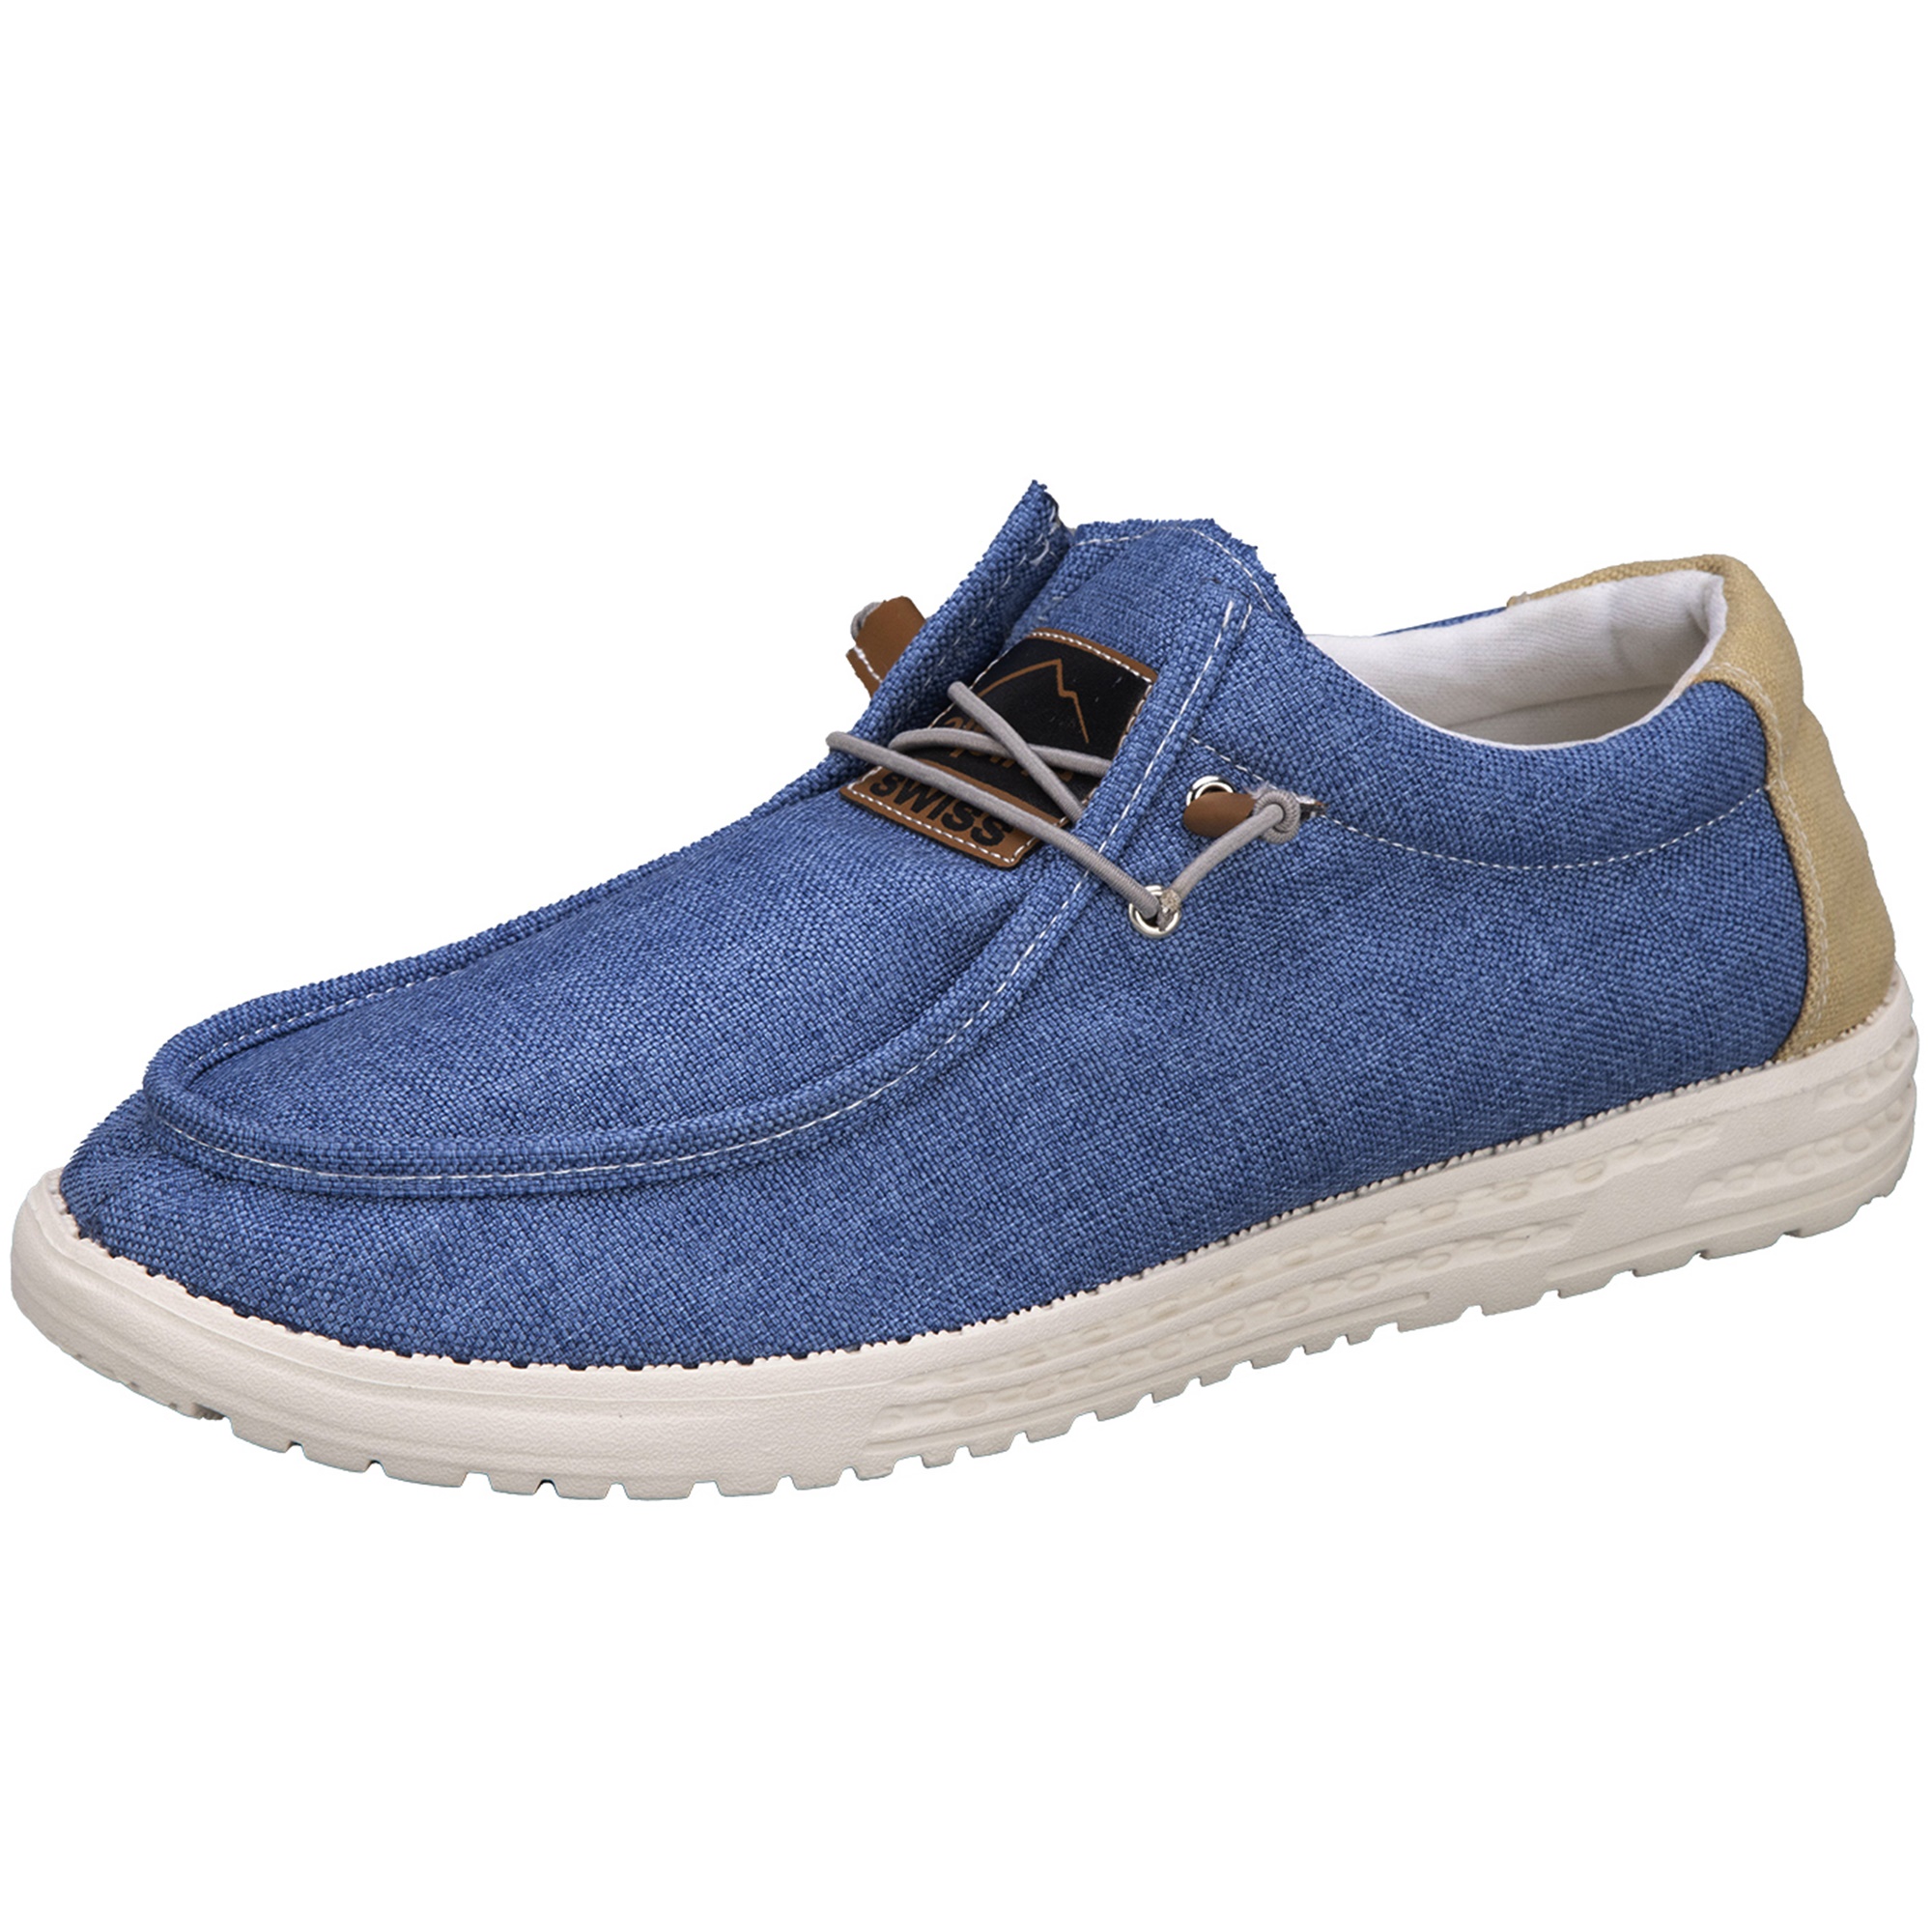 Alpine Swiss Flynn Mens Boat Shoes Casual Slip On Moccasin Loafers Sailing Deck Shoe So Light It Floats On Water - image 1 of 7